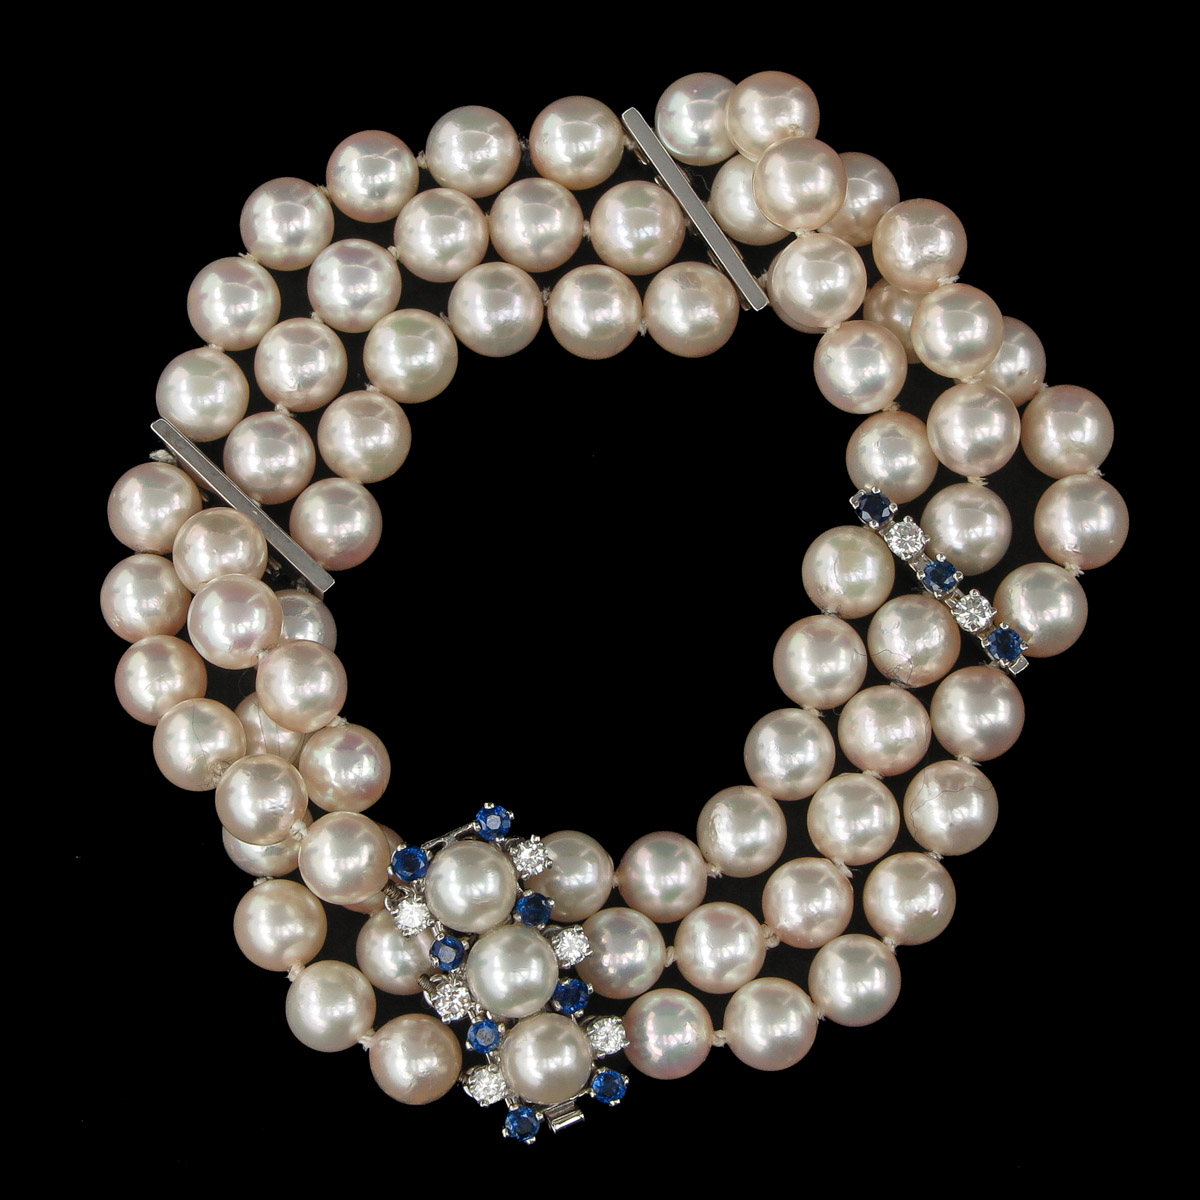 A Set of Pearl Jewelry - Image 5 of 10